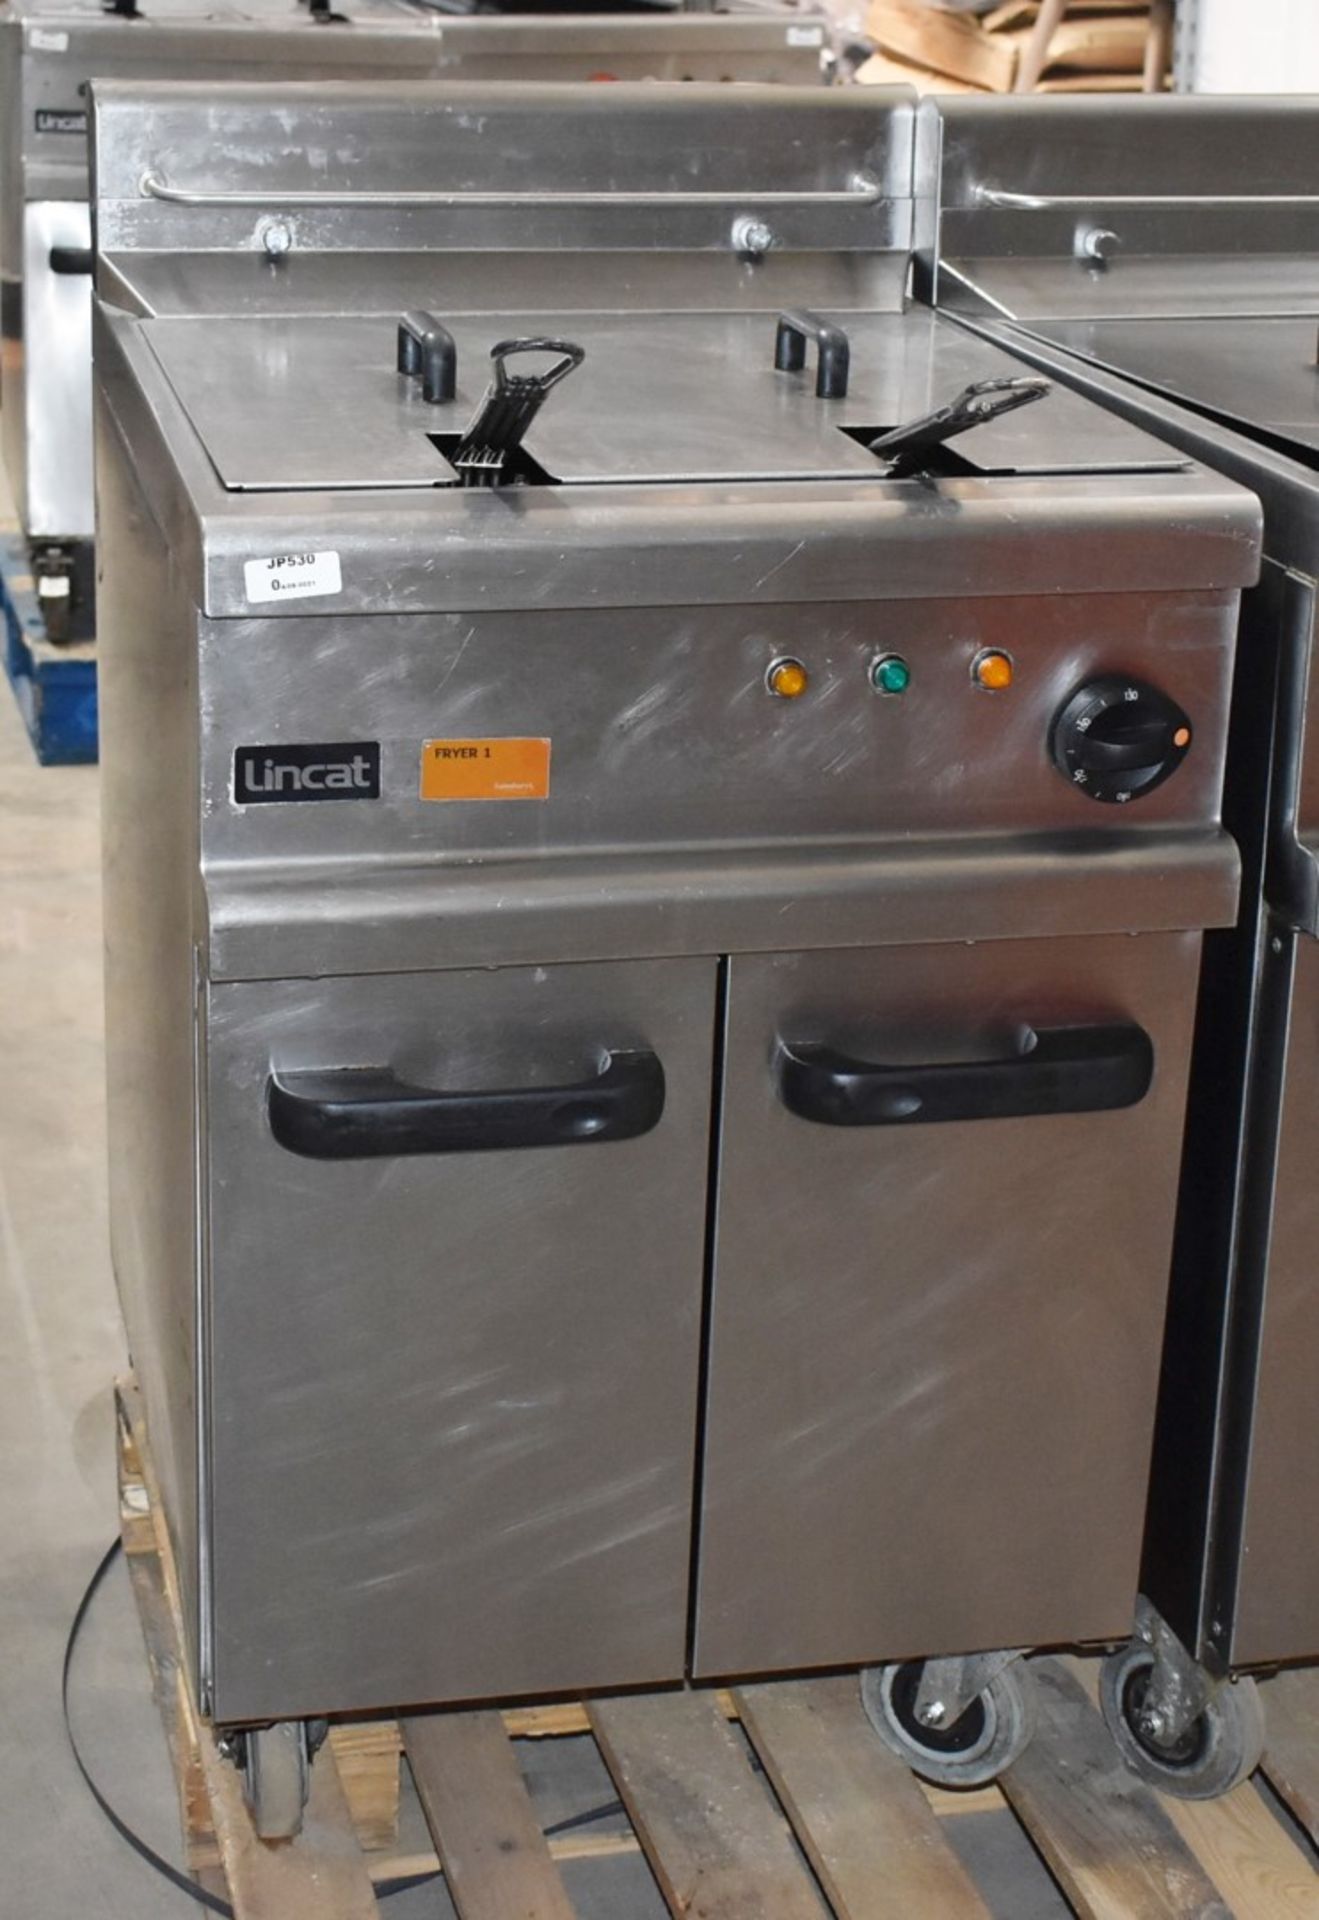 1 x Lincat Opus 700 OE7113 Single Large Tank Electric Fryer With Built In Filteration - 240V / 3PH P - Image 6 of 8